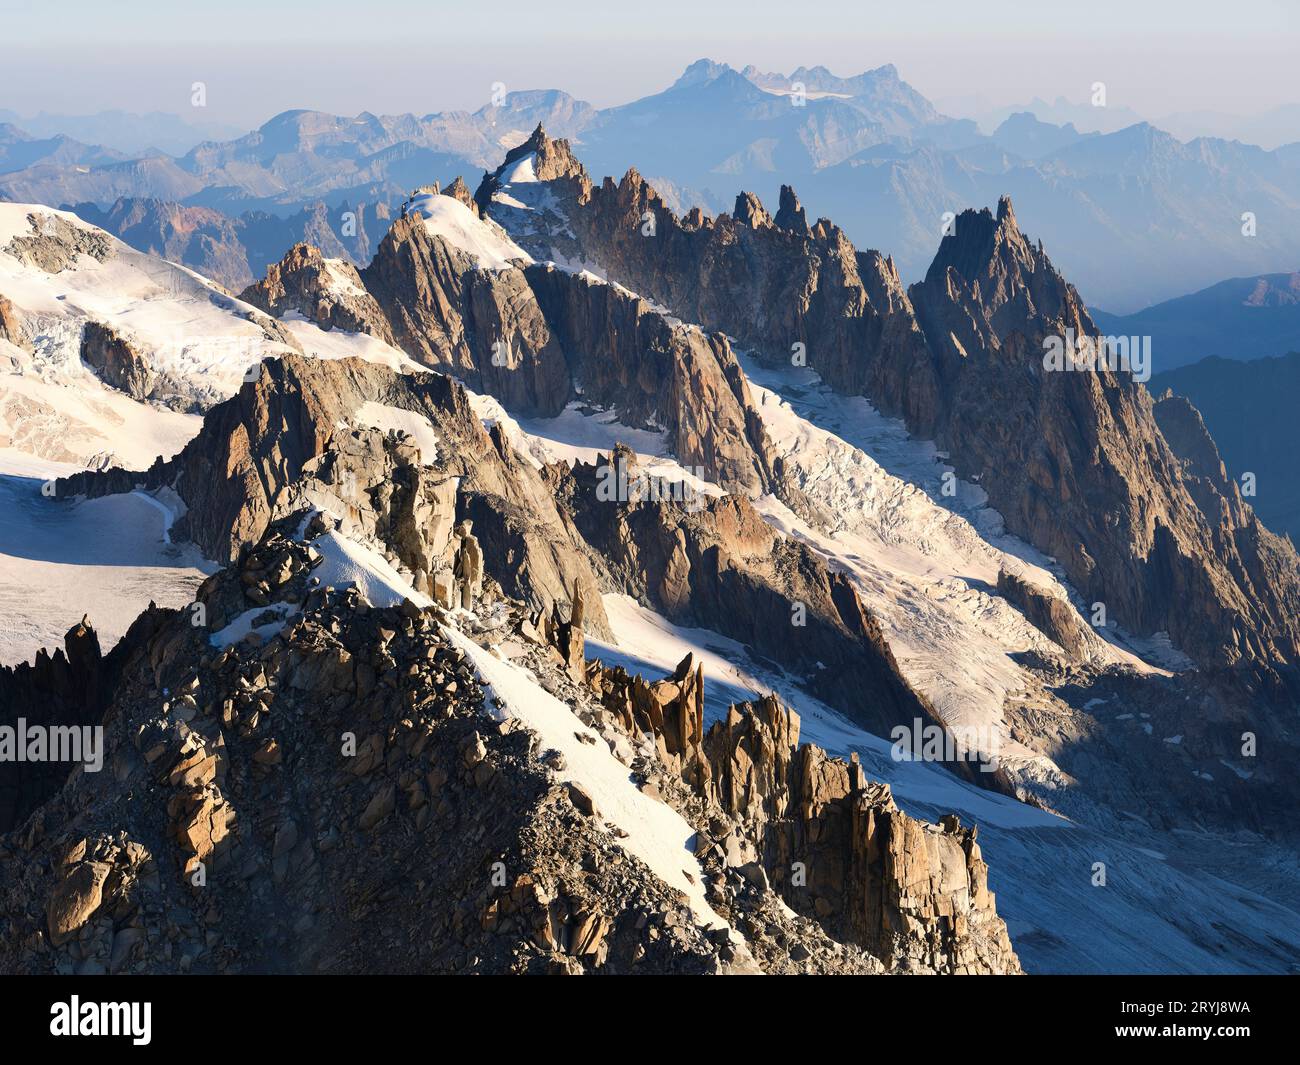 AERIAL VIEW. The jagged rock formations of (front to back) La Tour Ronde, Gros Rognon and Aiguilles de Chamonix Mont Blanc. Haute-Savoie, France. Stock Photo